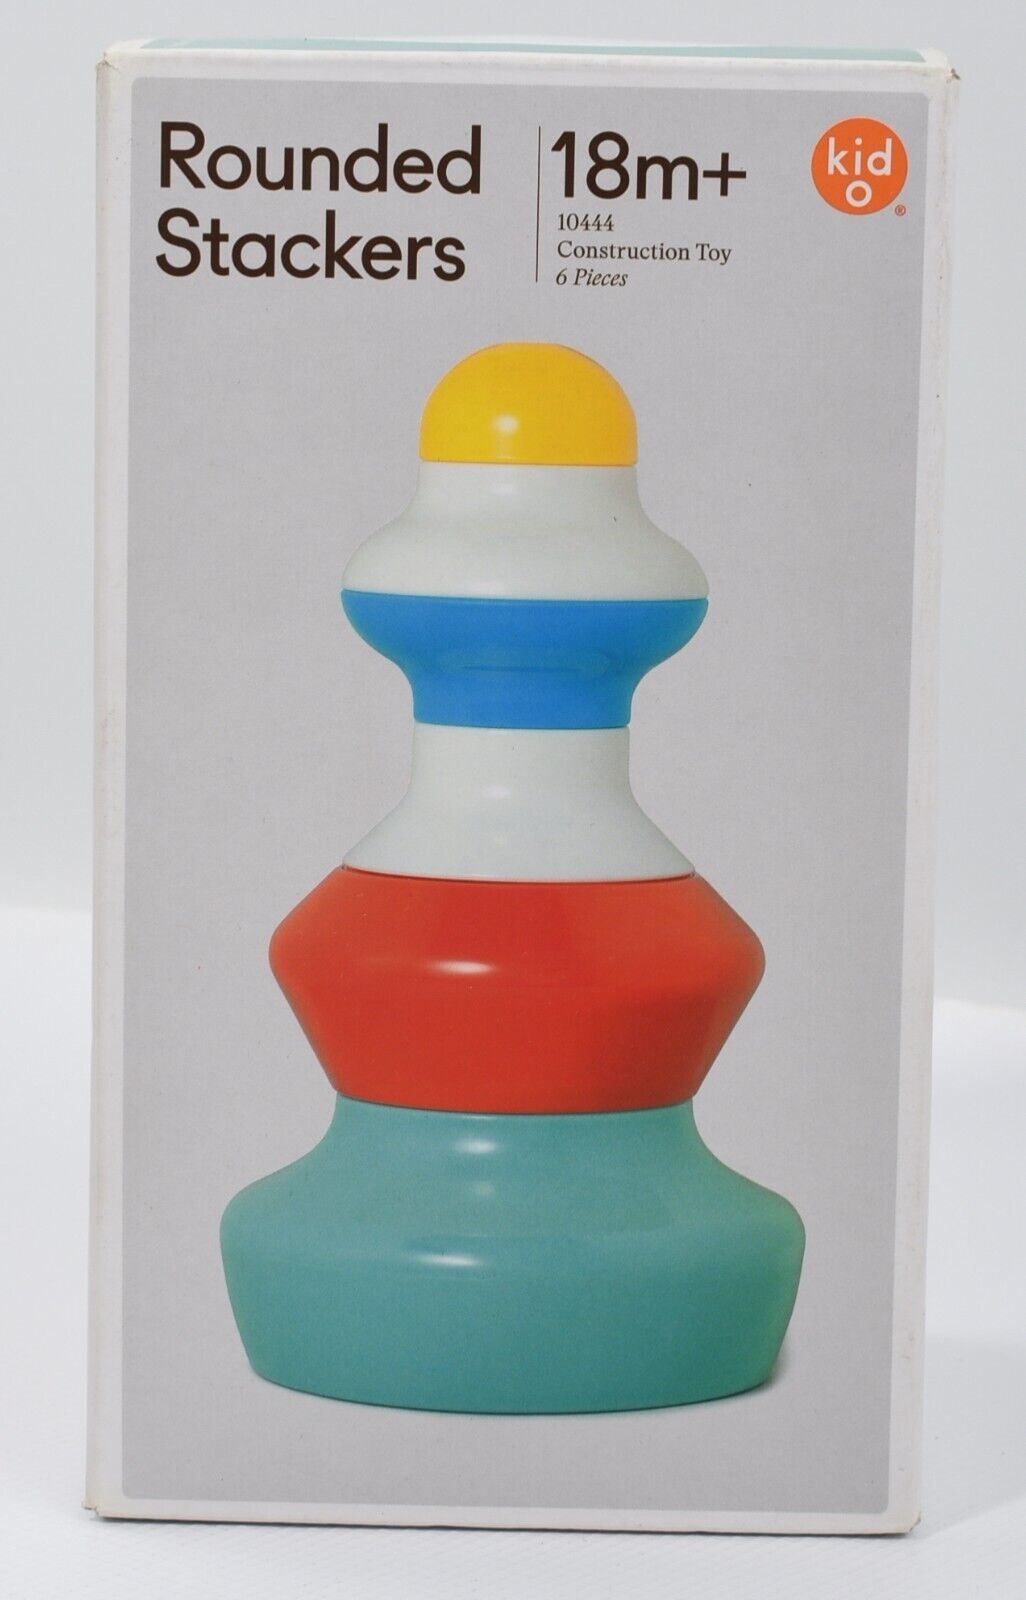 KID O Rounded Stackers, 6 Piece Colourful Construction Toy, 18+ months